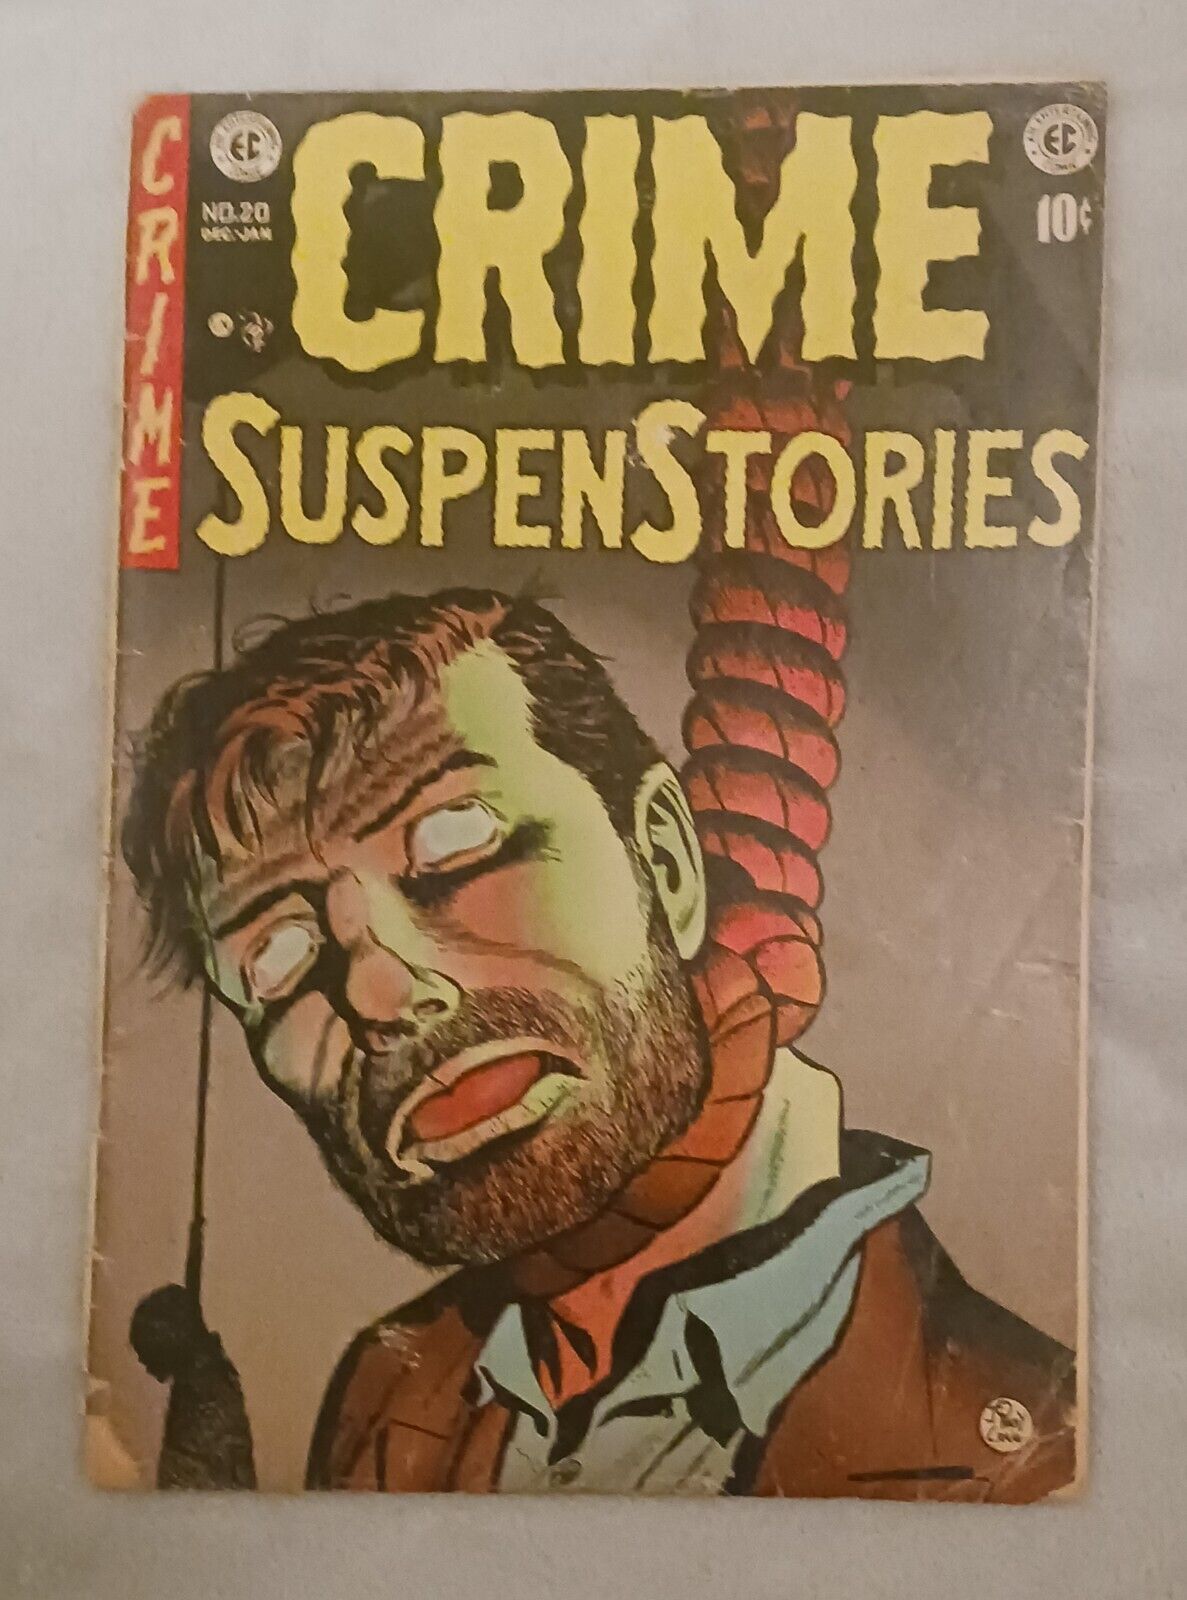 CRIME SUSPENSTORIES #20 GD/VG USED IN SOTI CLASSIC HANGING COVER ICONIC HORROR 